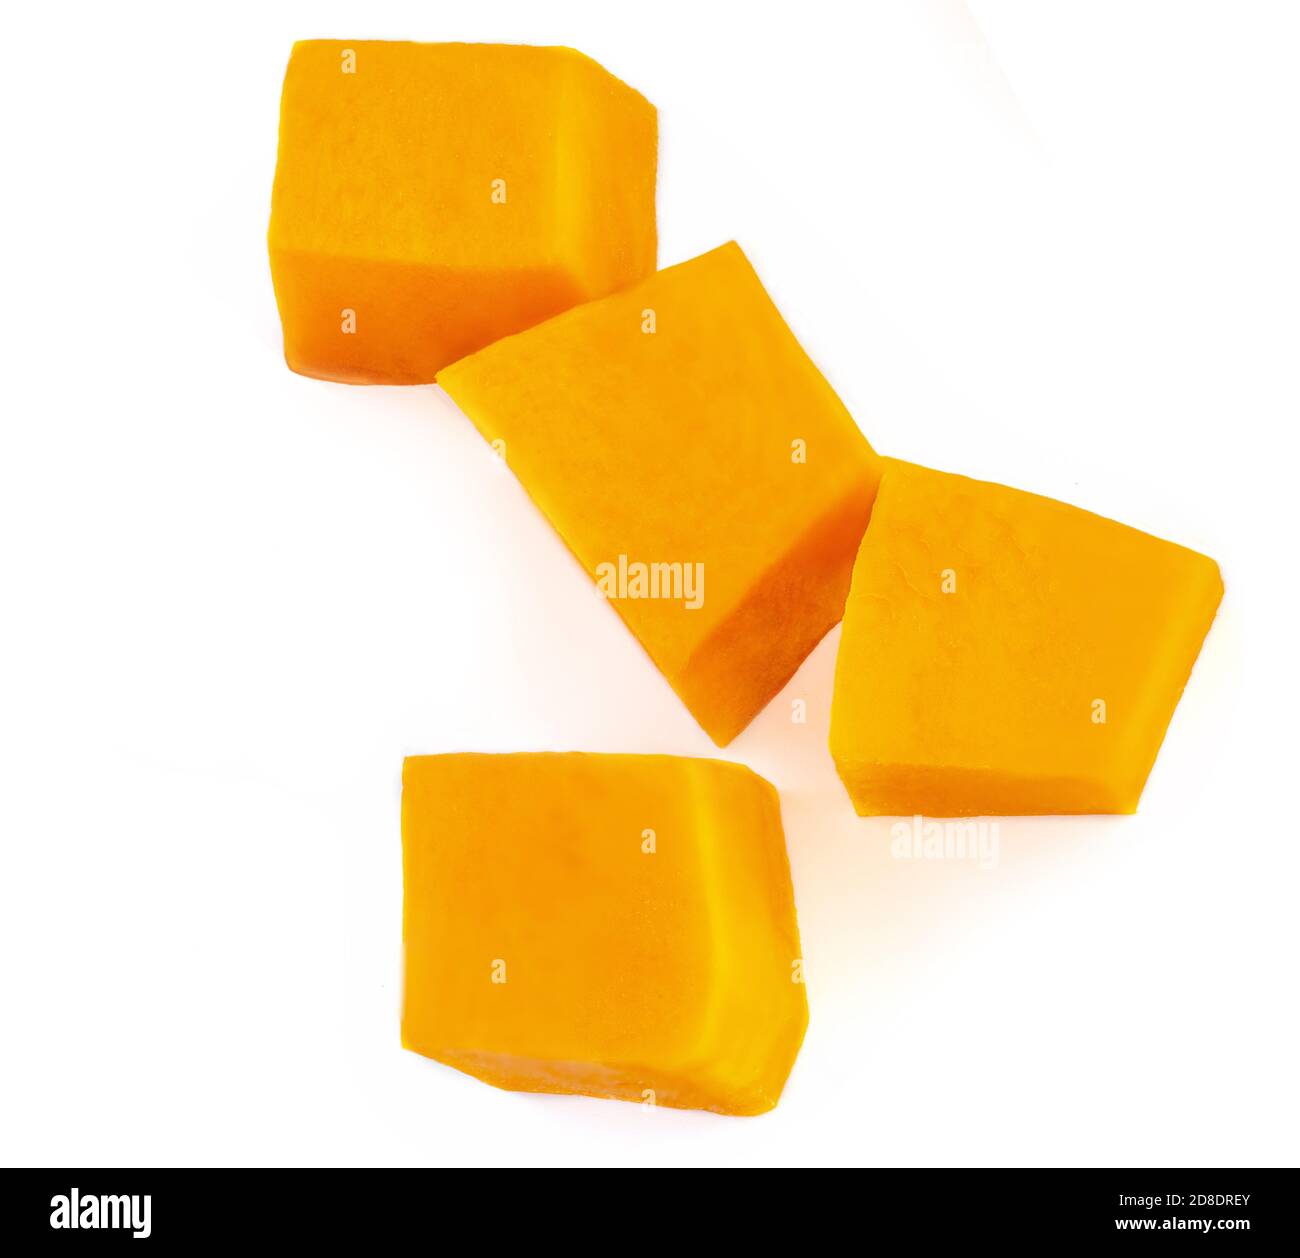 Diced Pumpkin  isolated on white background.  Fresh Pumpkin pieces cut in a cube slice, top view. Flat lay Stock Photo